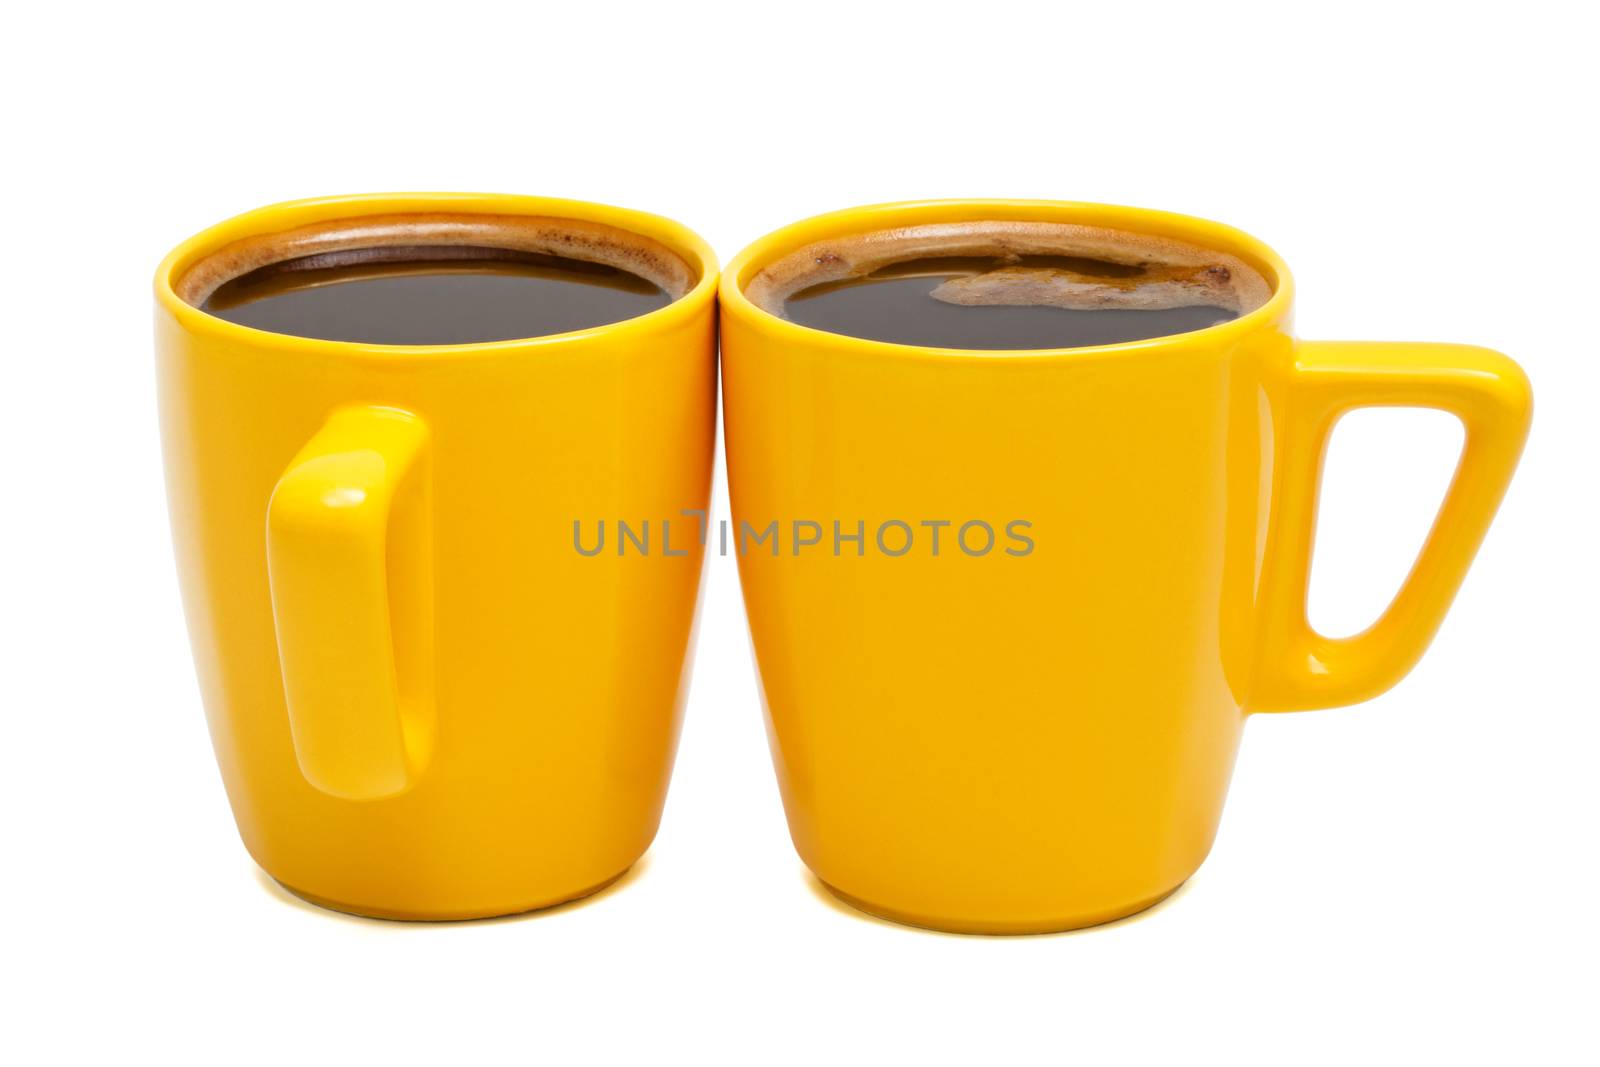 yellow mugs of coffee by terex